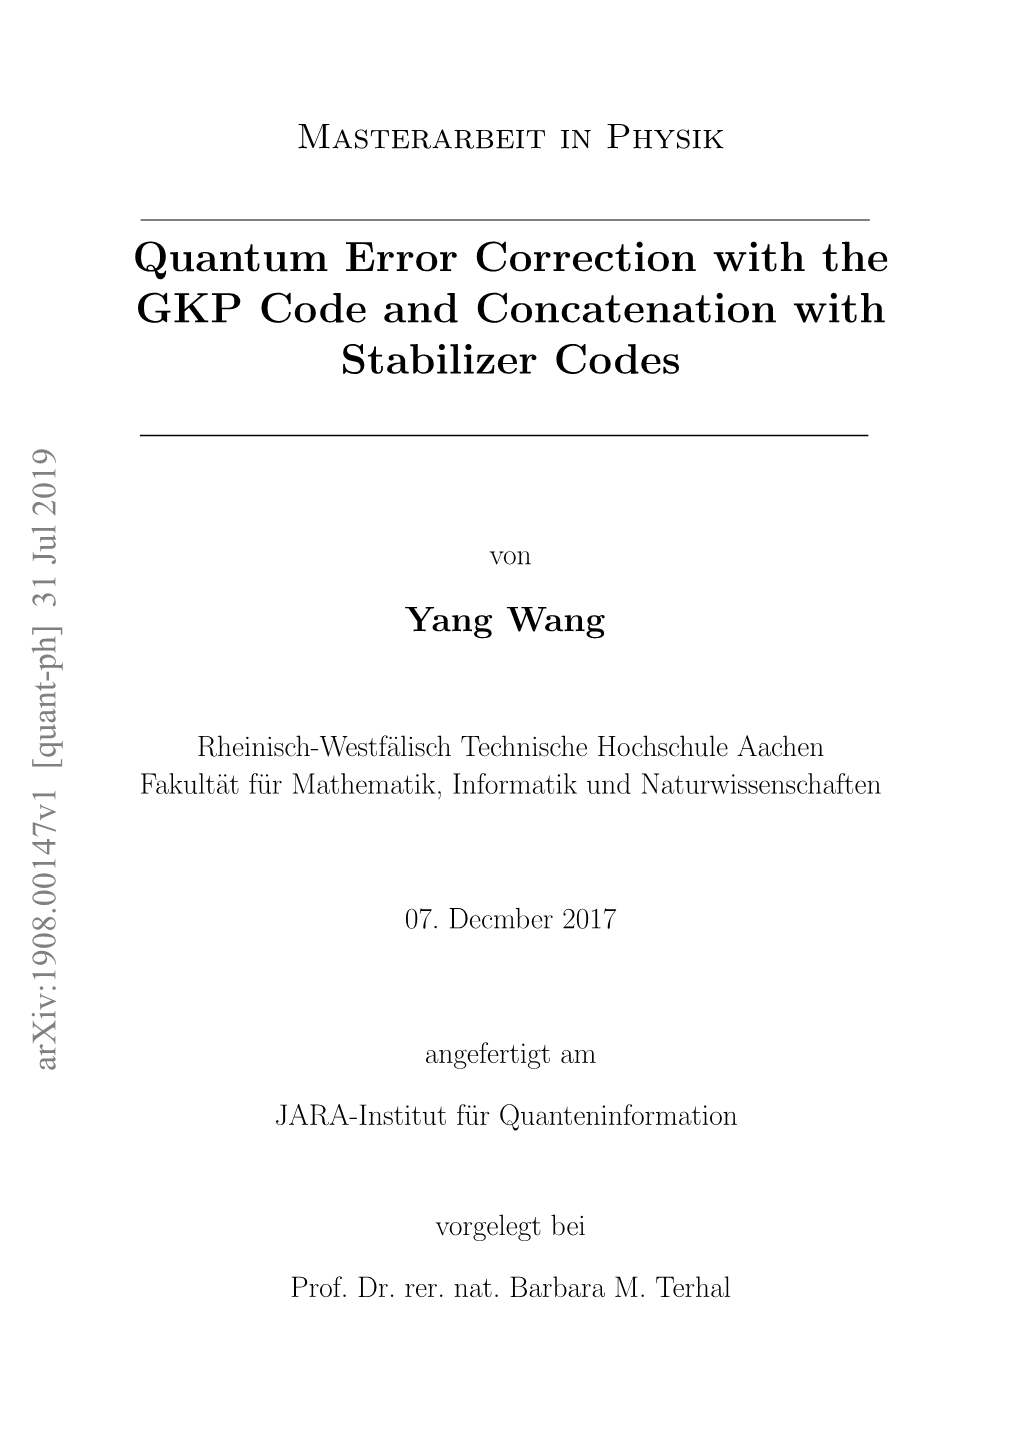 Quantum Error Correction with the GKP Code and Concatenation with Stabilizer Codes